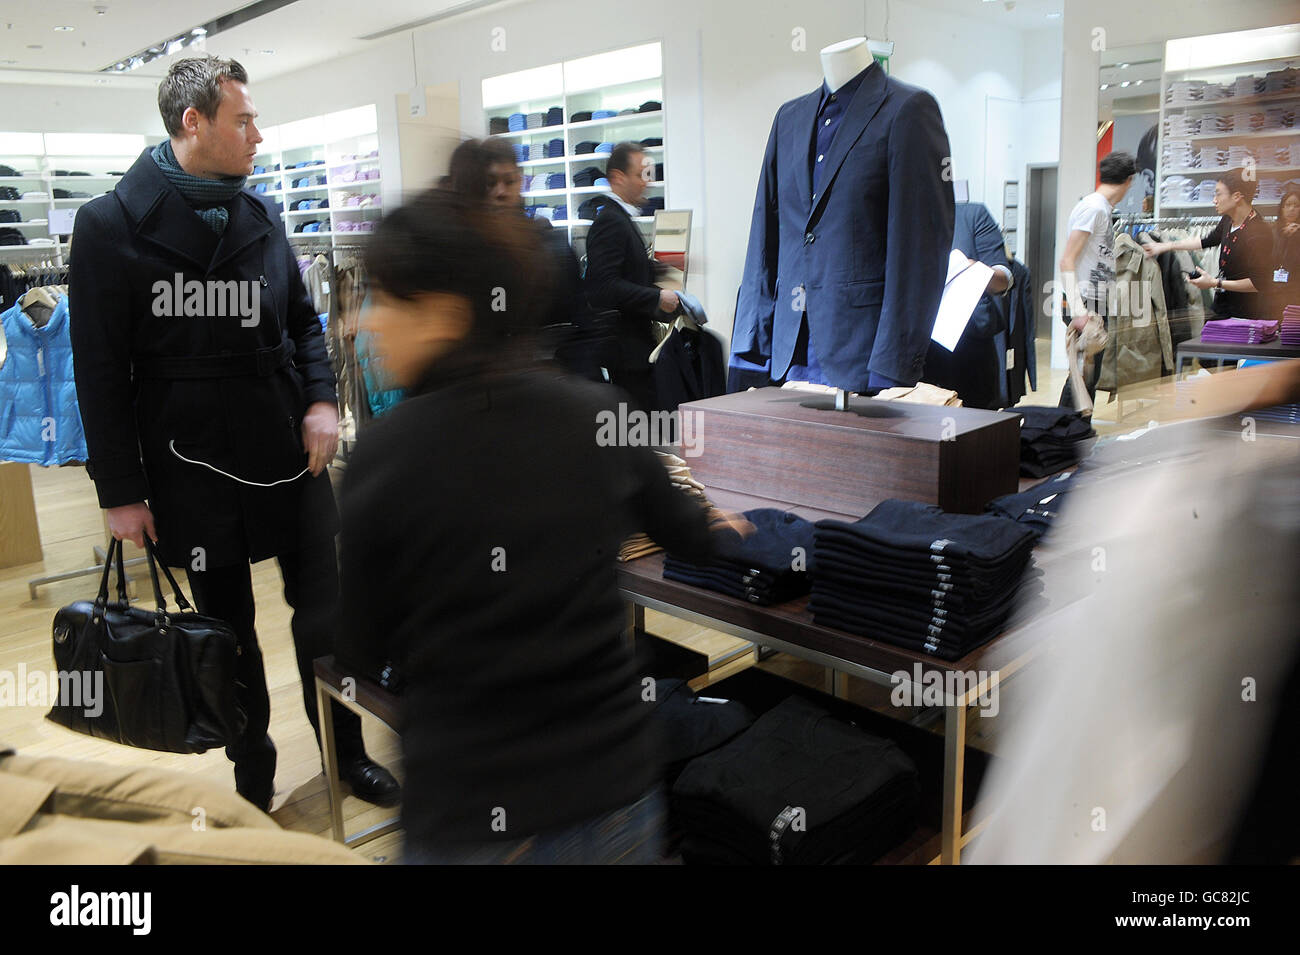 Designer Jil Sander's +J collection goes on sale at the Uniqlo store Stock  Photo - Alamy